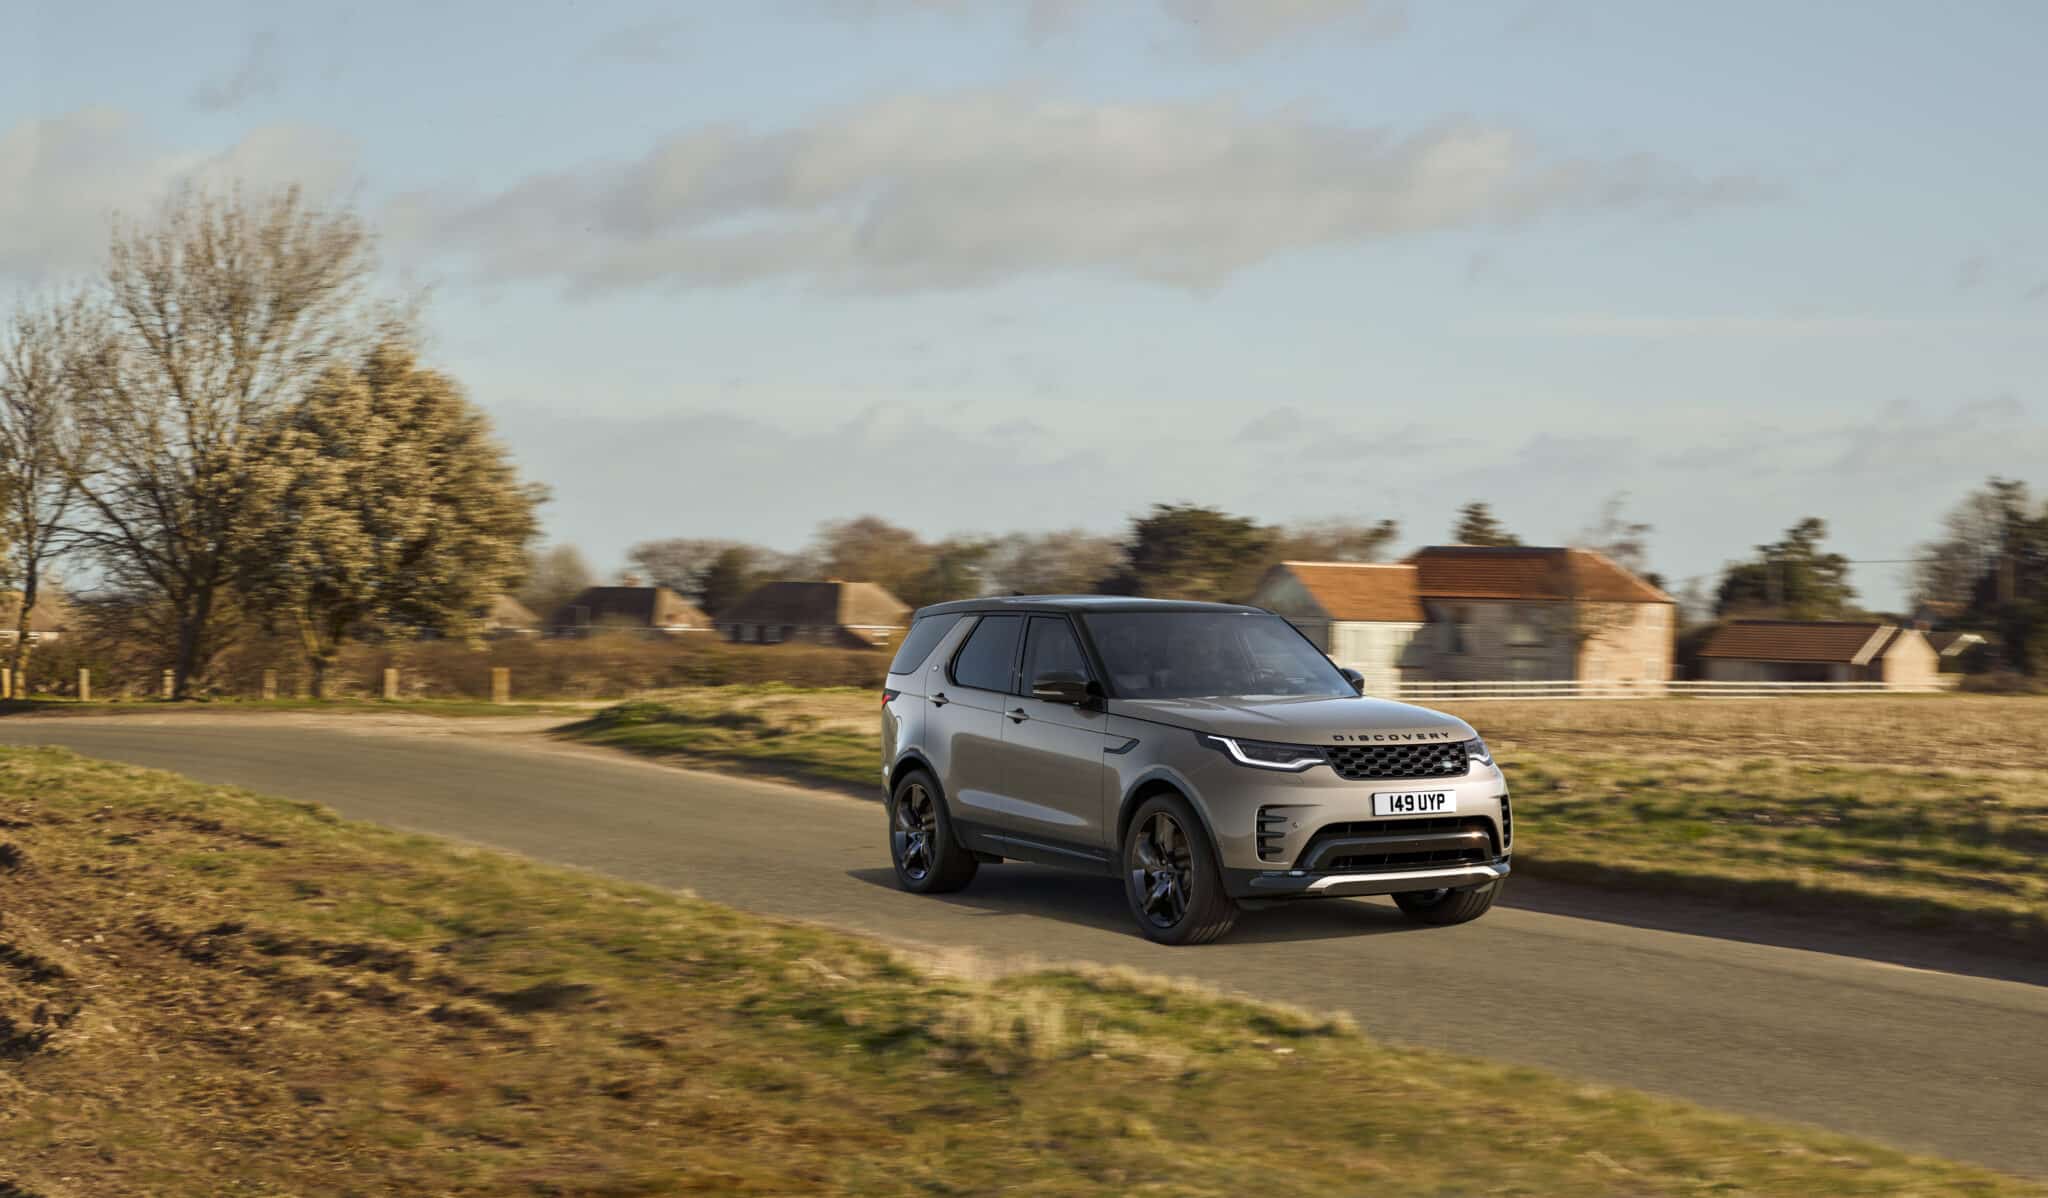 2021 Land Rover Discovery 7 scaled